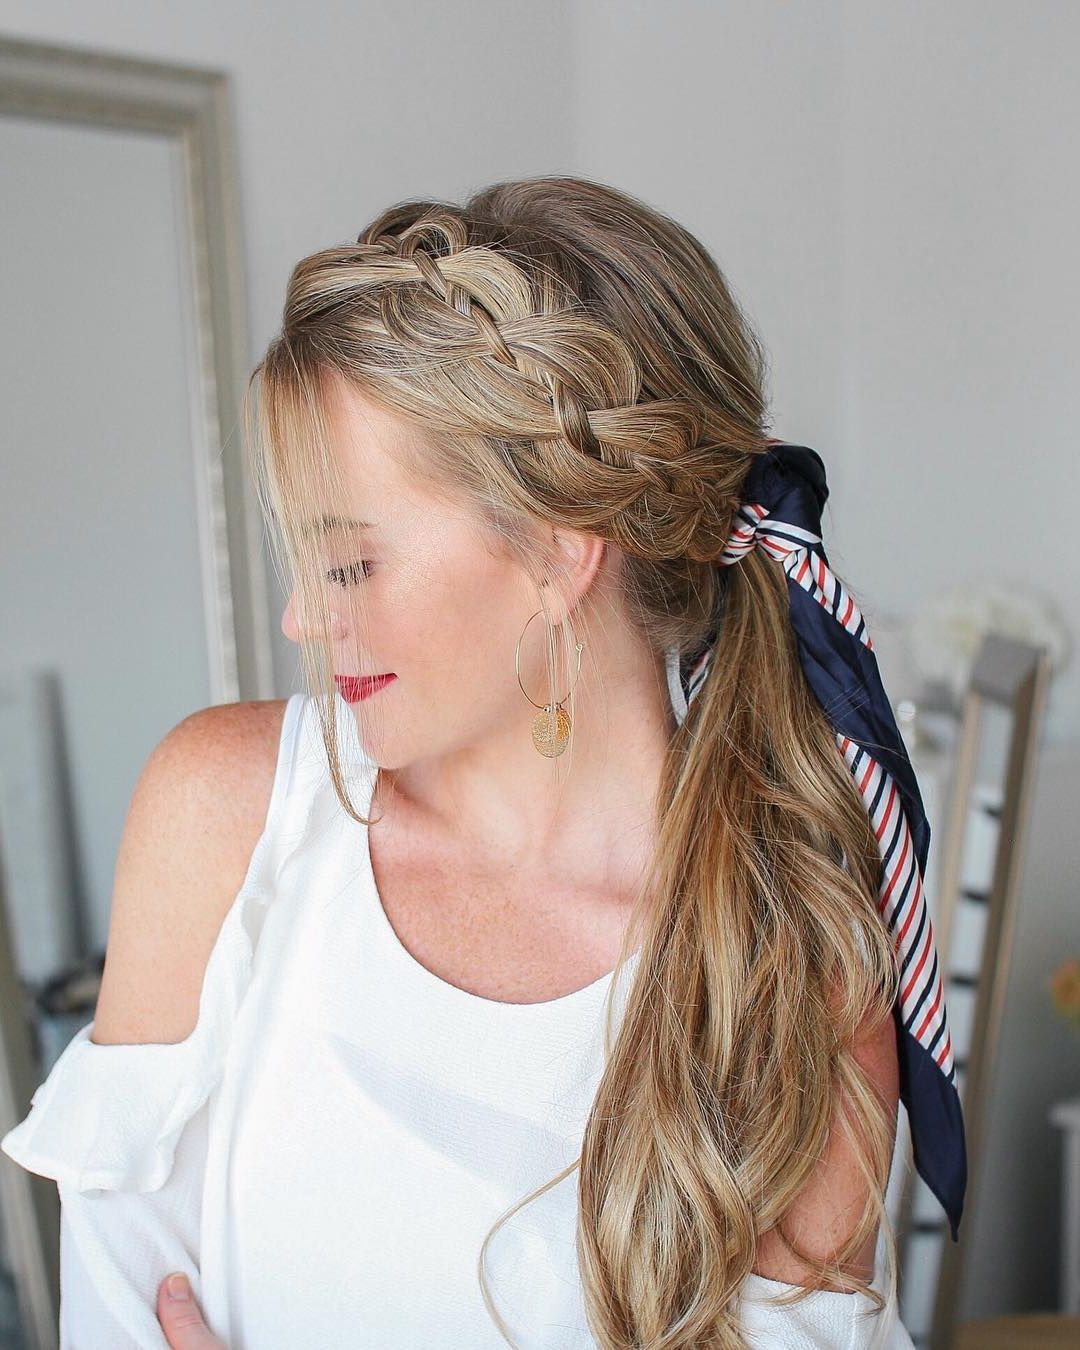 Fashionable Stylish Braids Ponytail Hairstyles Throughout 10 Creative Ponytail Hairstyles For Long Hair, Summer Hairstyle (View 11 of 20)